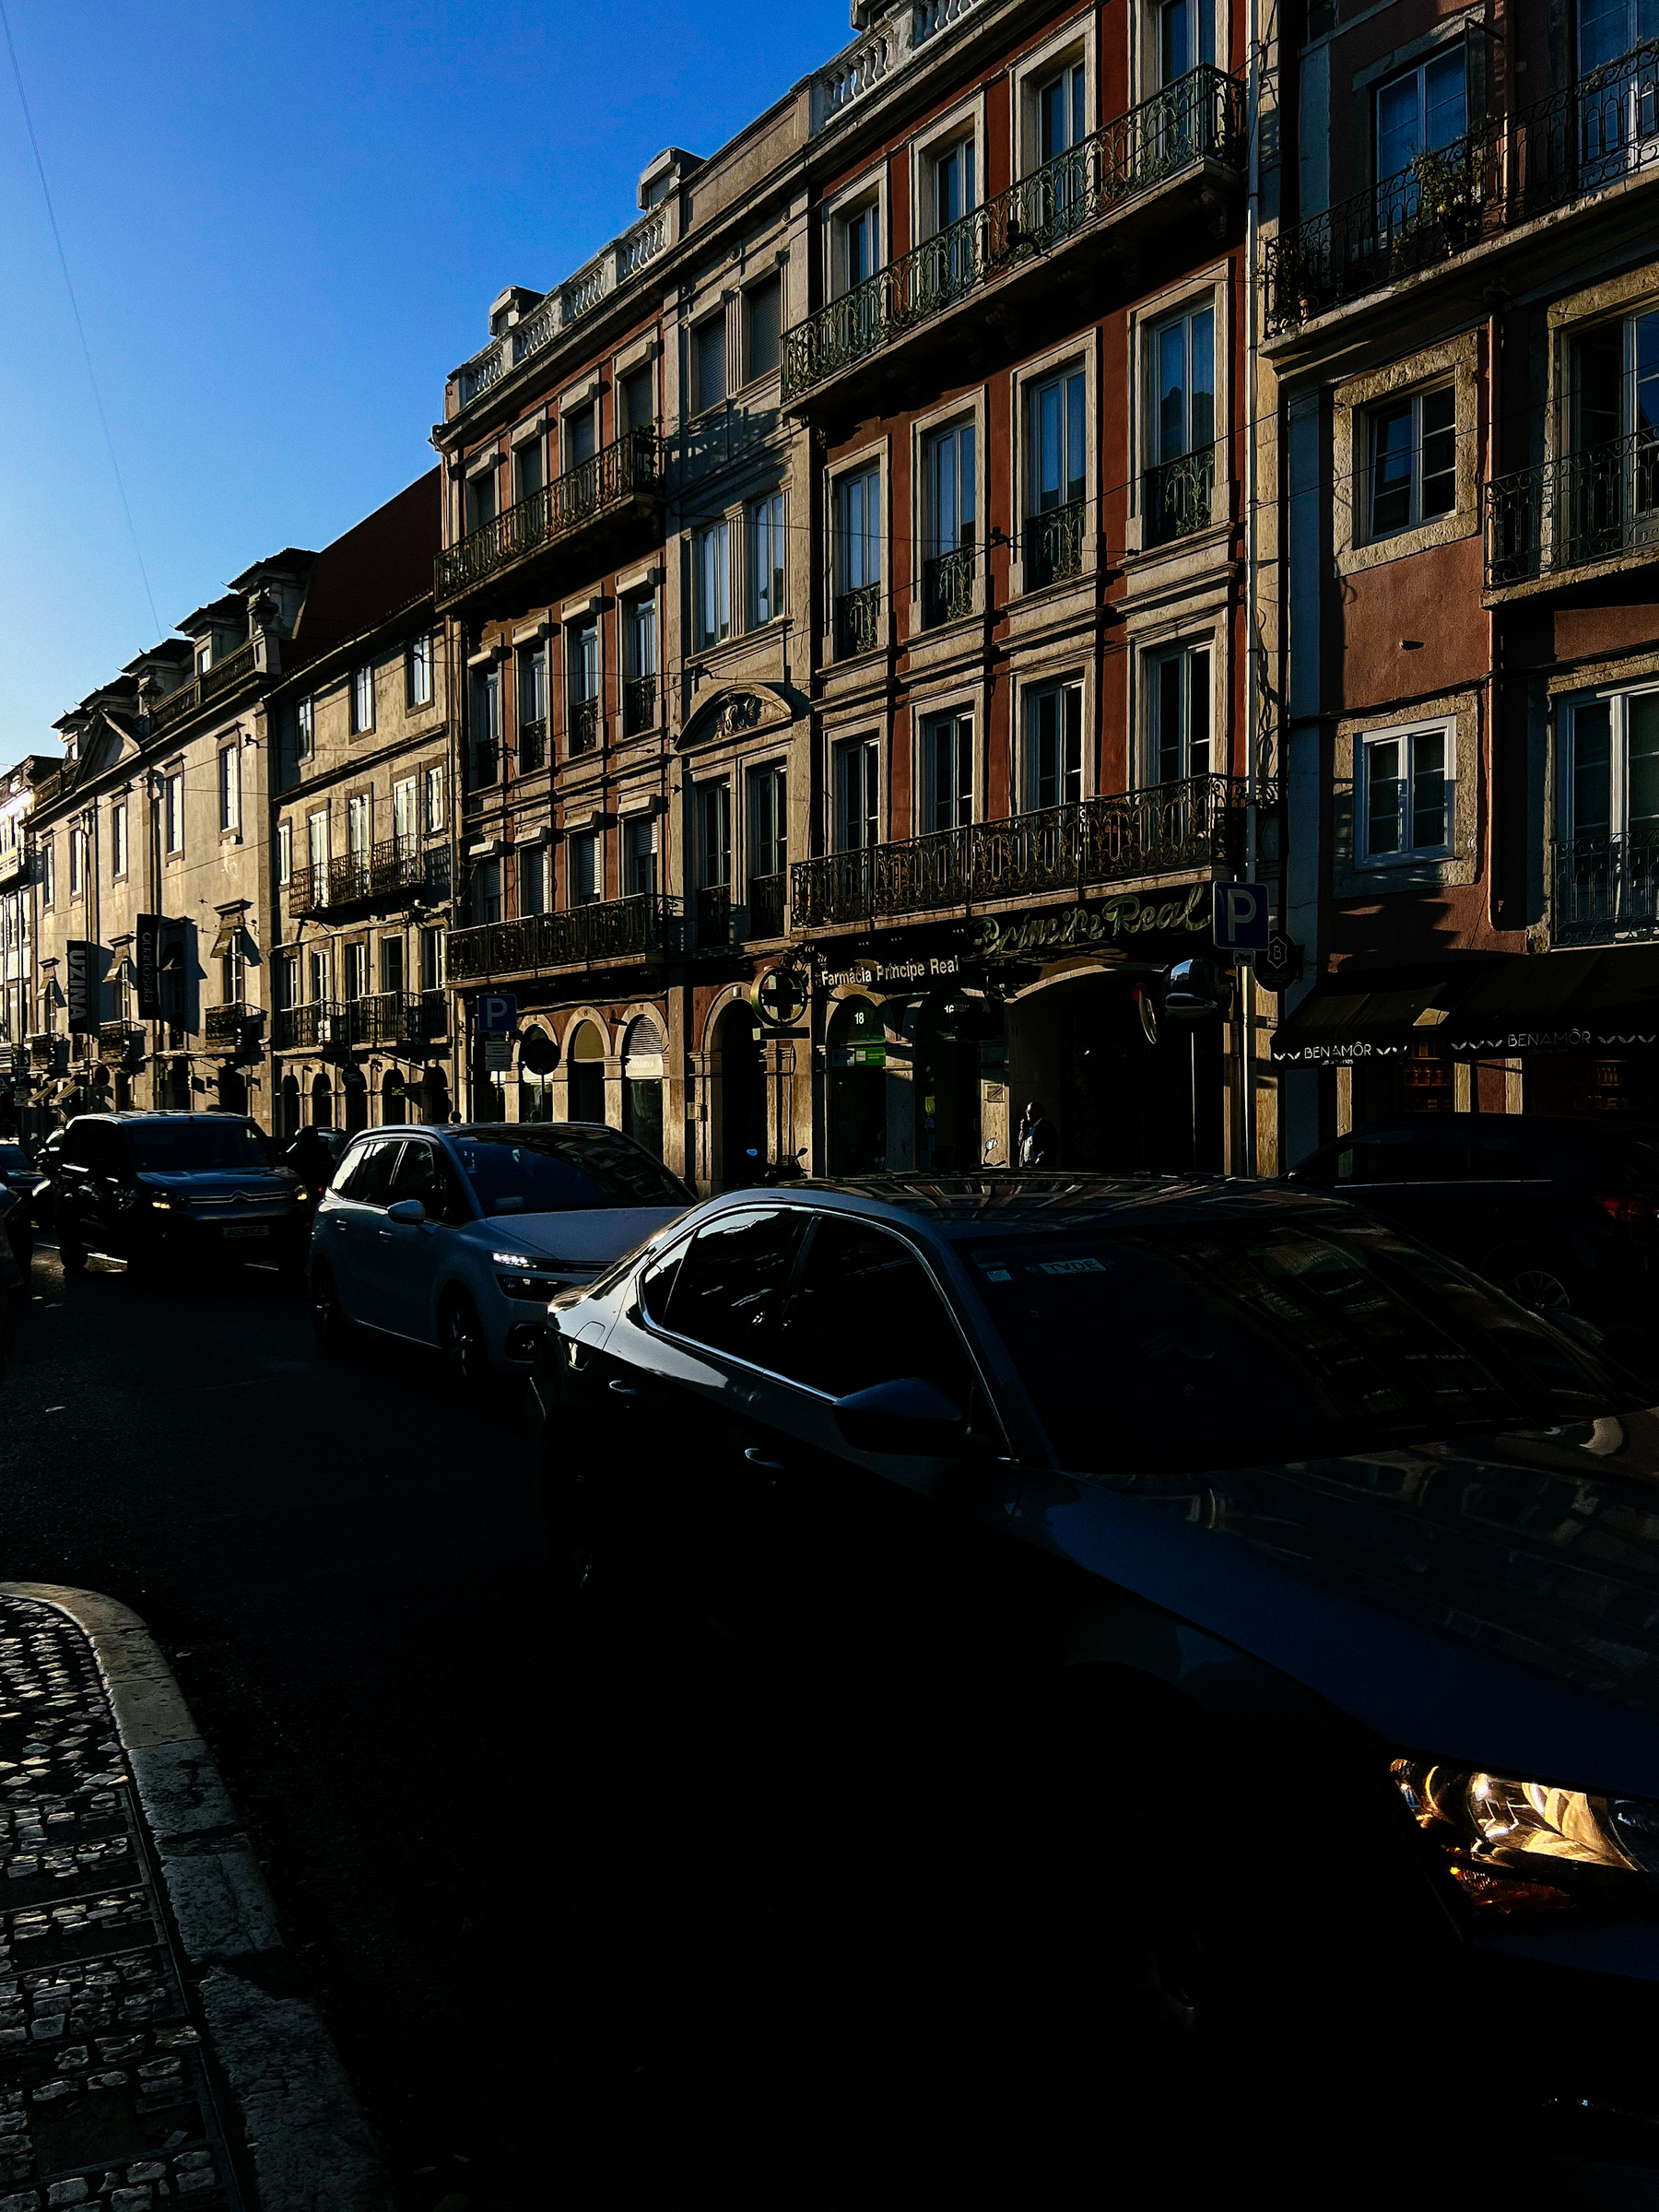 Heavy traffic in downtown Lisbon, a classic building and cars. Dusk.